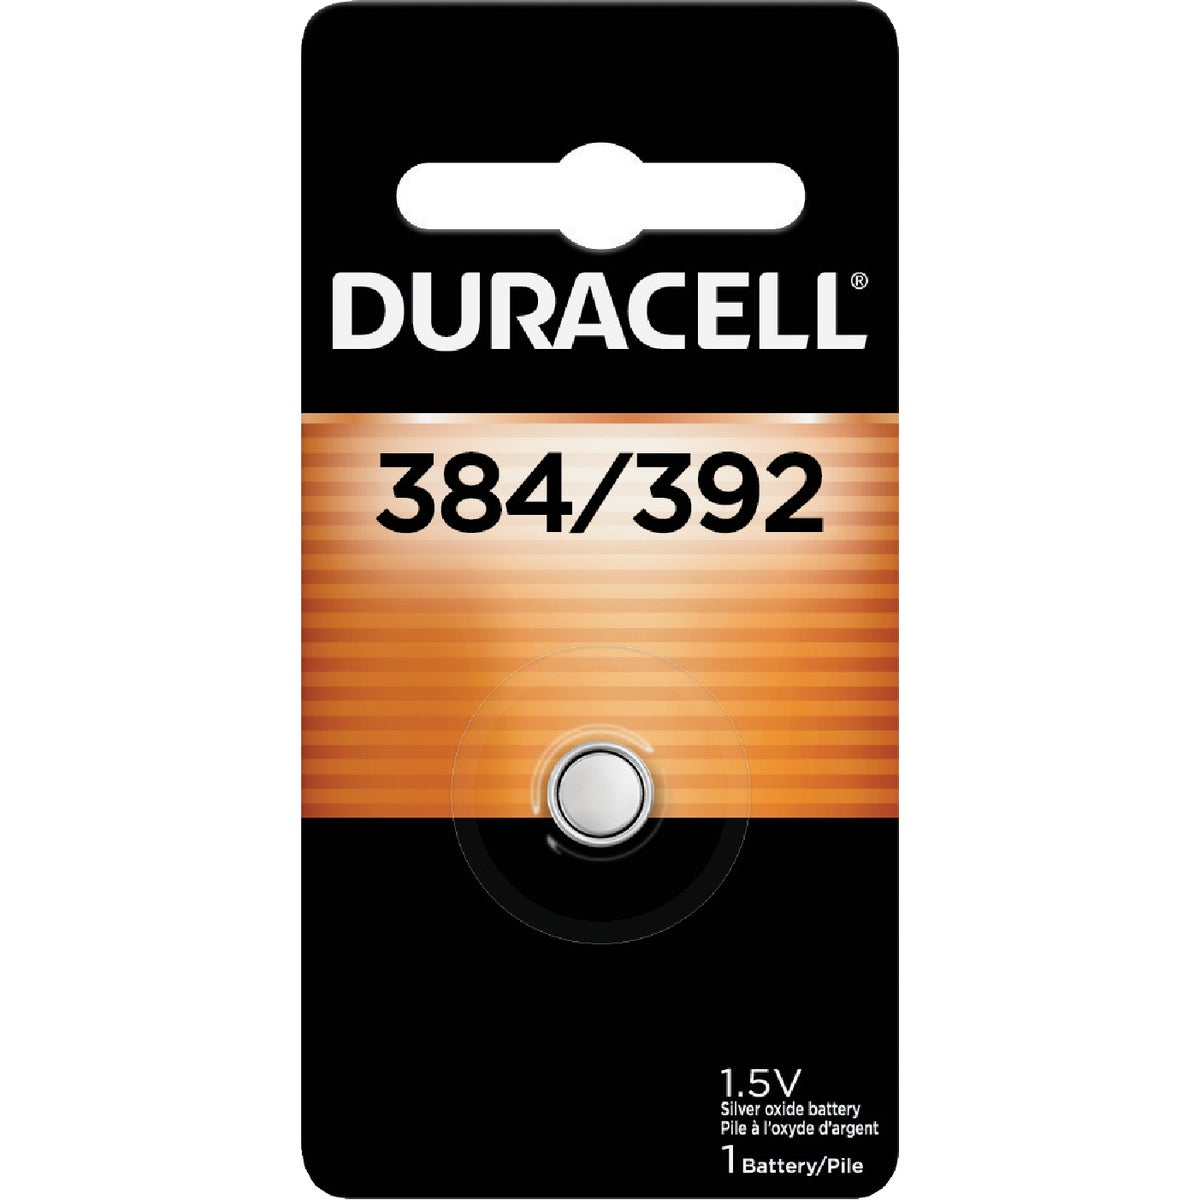 Duracell 384/392 Silver Oxide Button Cell Battery